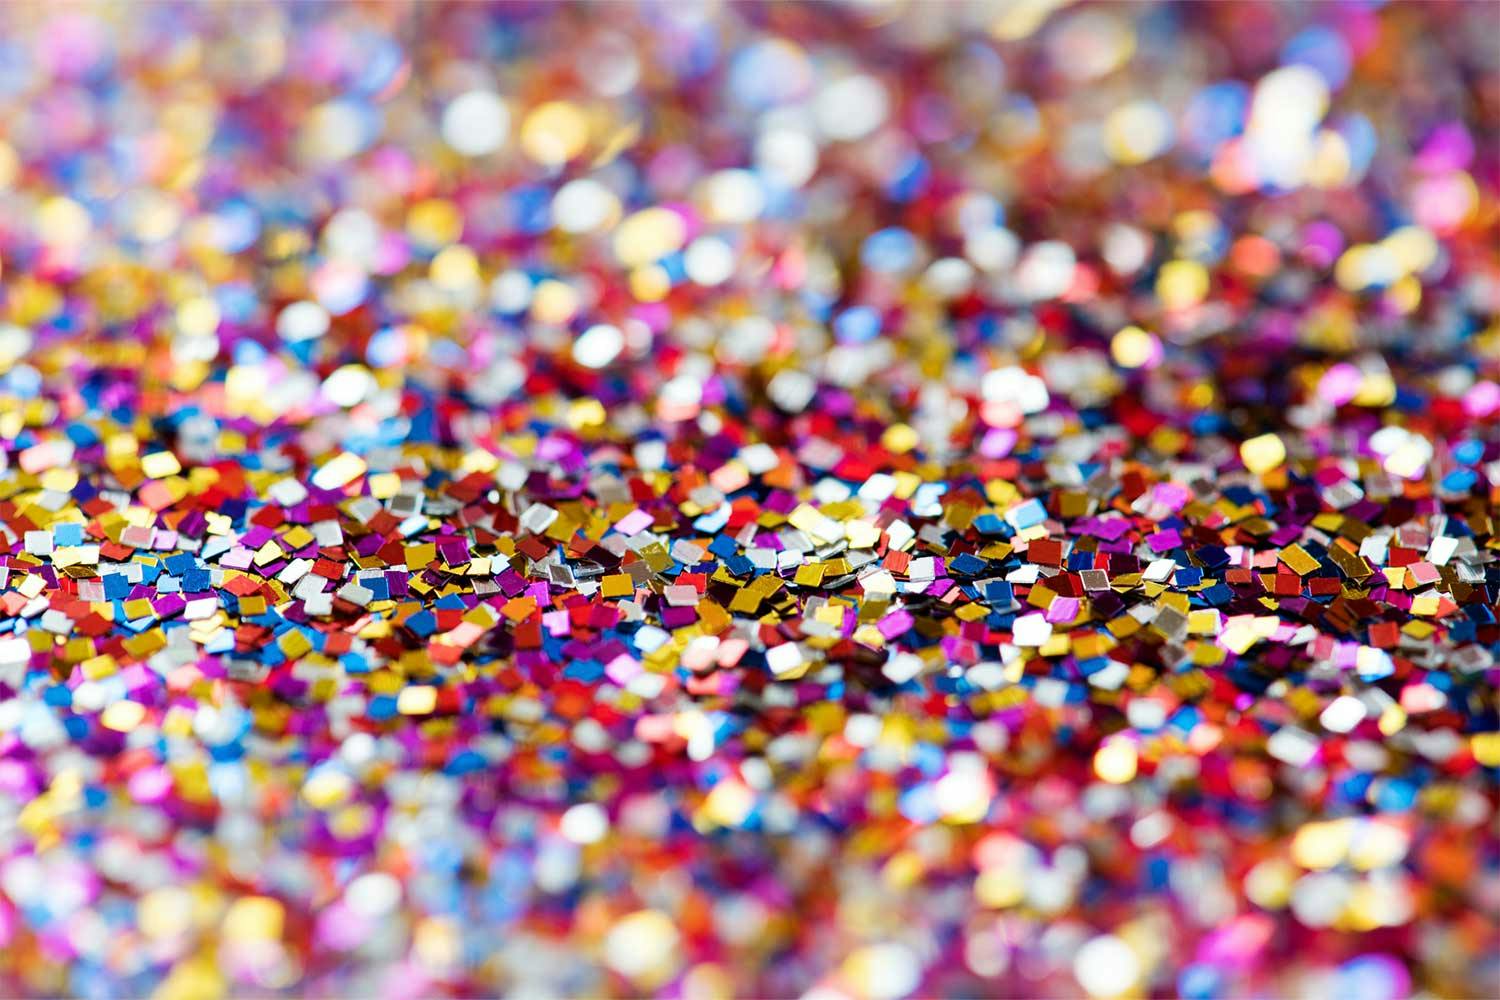 A pile of tiny, square, shiny flecks of glitter in shades of red, gold, blue, and pink.